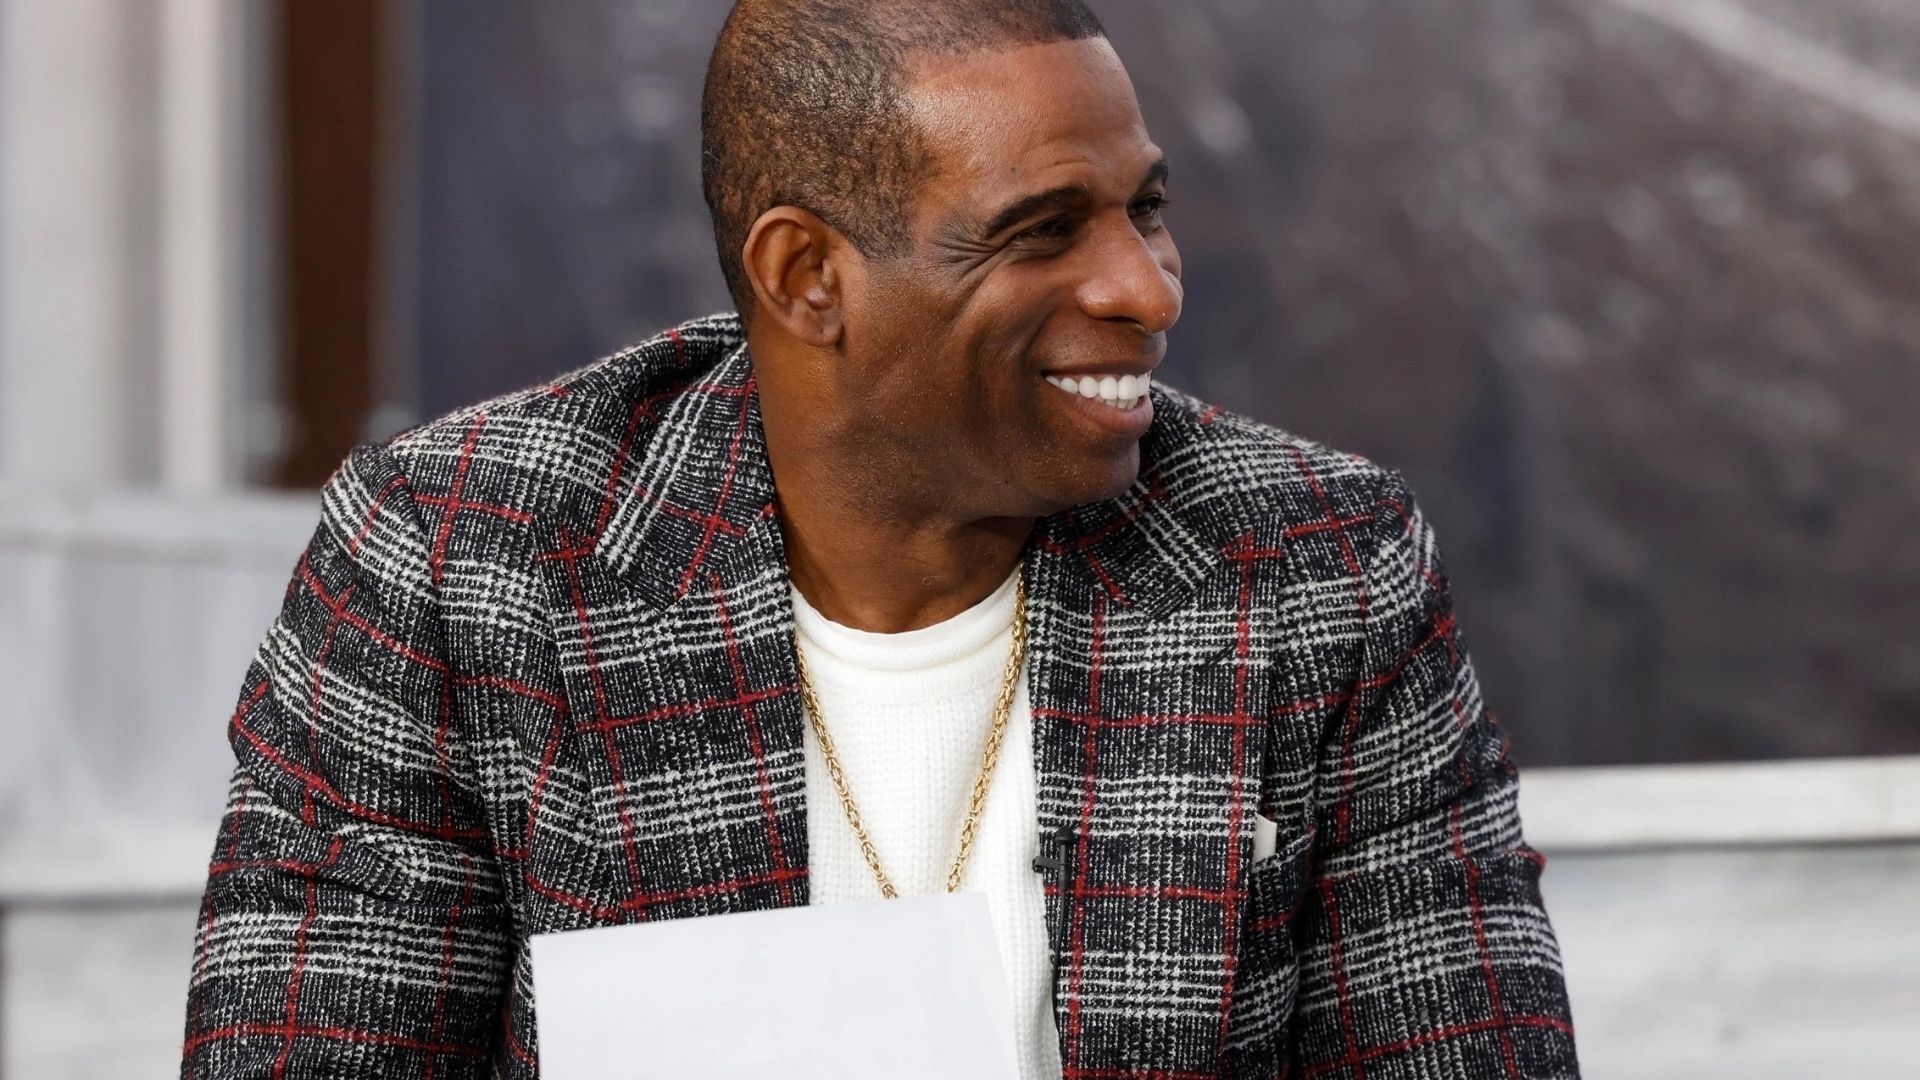 Deion Sanders: What Is The Current Net Worth Of This Famous Personality From America?